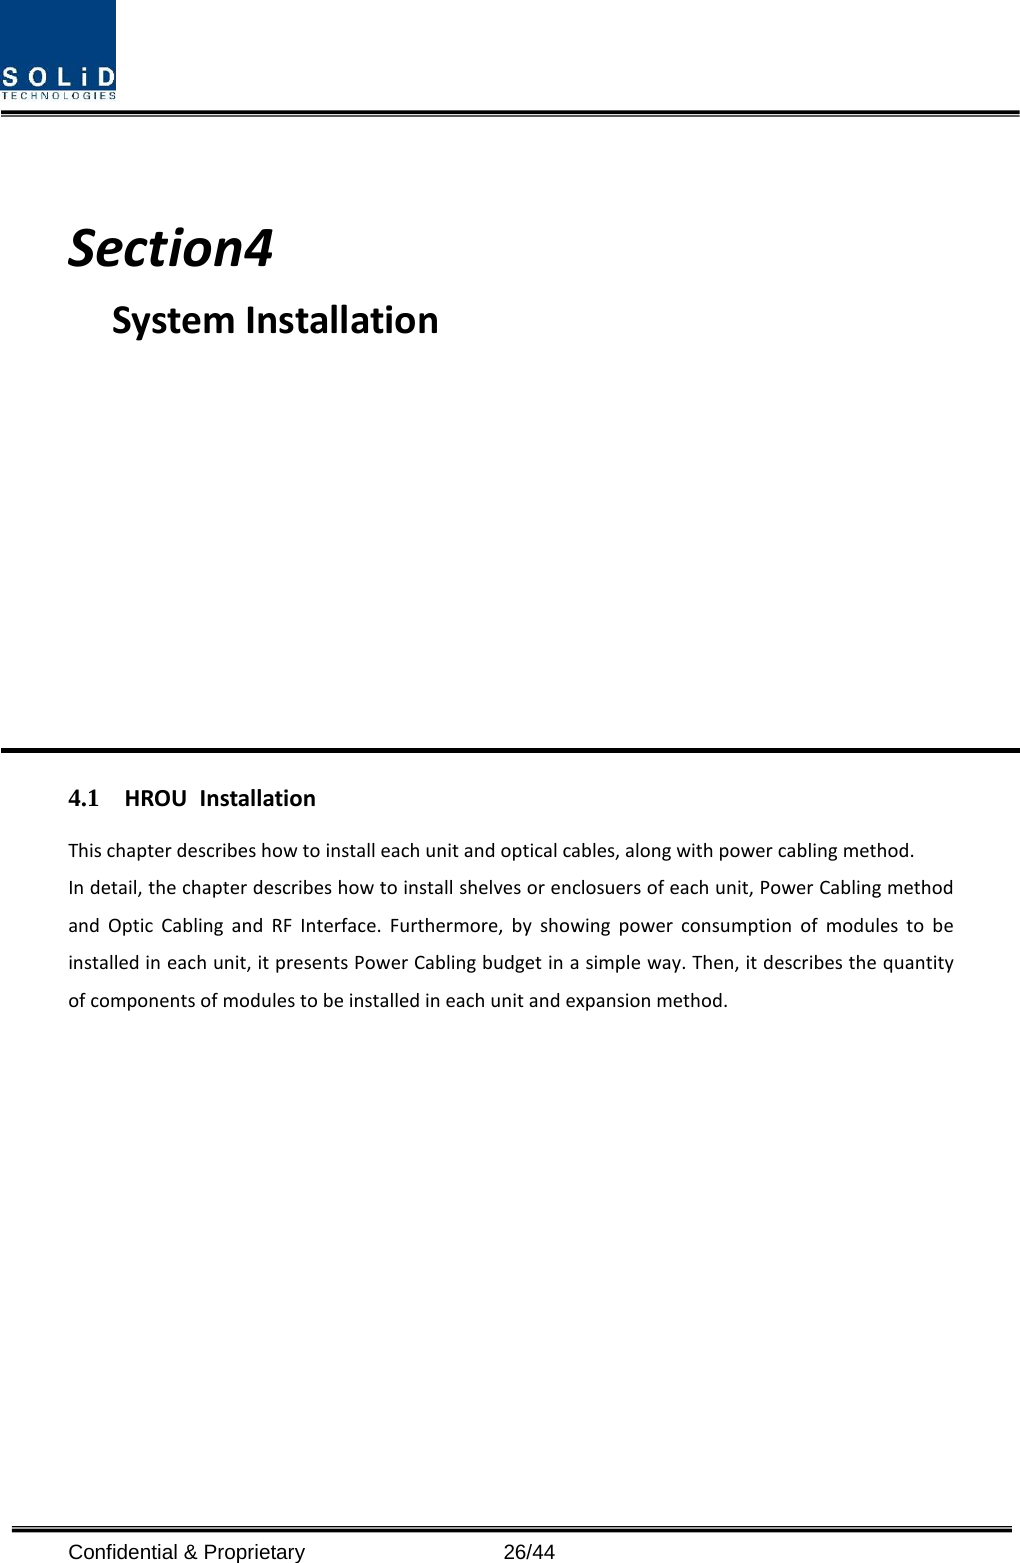    Section4                                           System Installation            4.1 HROU Installation This chapter describes how to install each unit and optical cables, along with power cabling method. In detail, the chapter describes how to install shelves or enclosuers of each unit, Power Cabling method and Optic Cabling and RF Interface. Furthermore, by showing power consumption of modules to be installed in each unit, it presents Power Cabling budget in a simple way. Then, it describes the quantity of components of modules to be installed in each unit and expansion method.            Confidential &amp; Proprietary                   26/44 